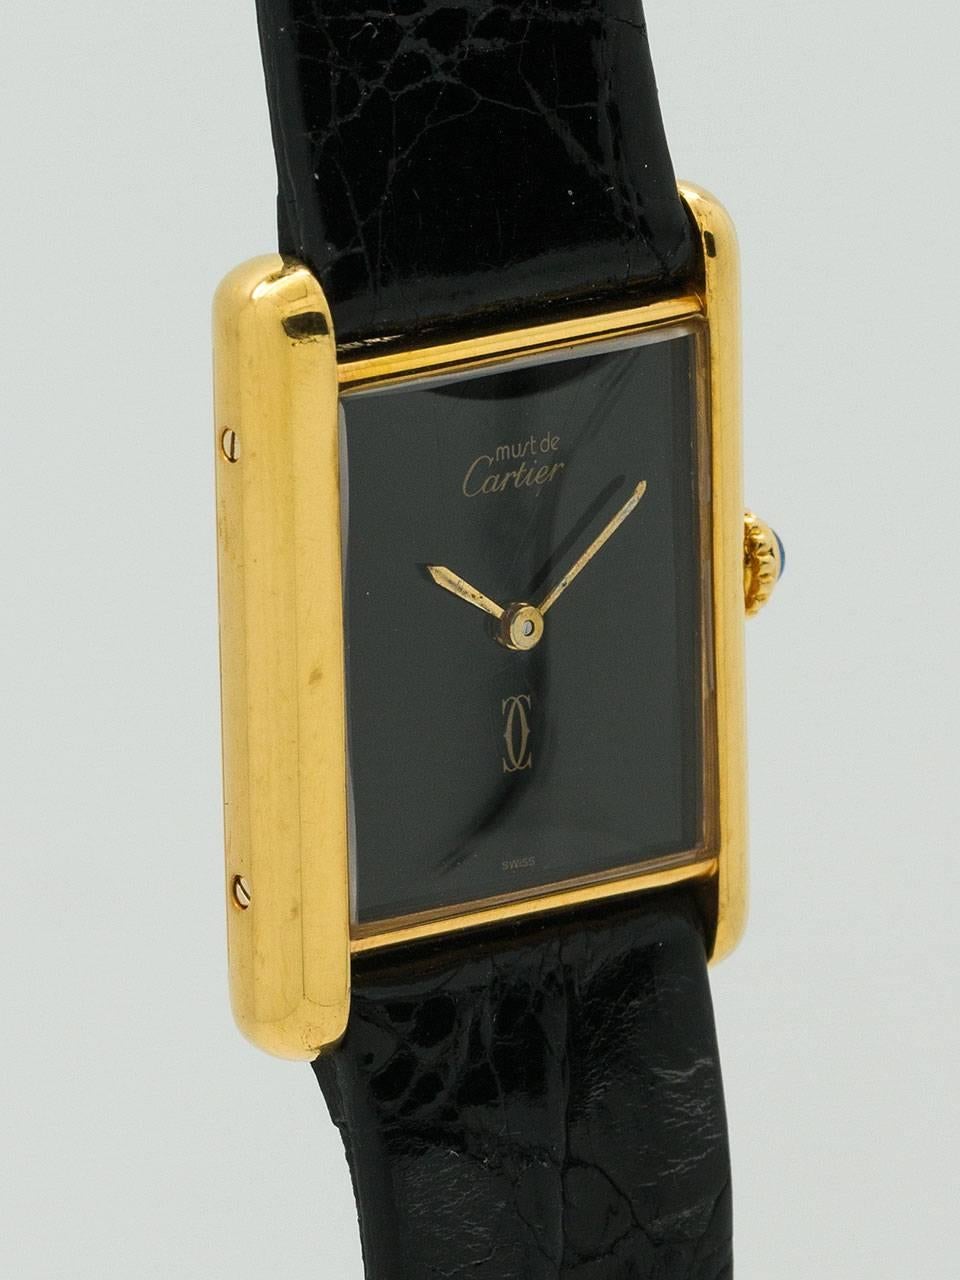 Cartier Man's Vermeil Tank Louis Must de Cartier, circa 1970s. Vermeil, 20 microns gold over silver, 23.5 X 31mm case secured by four screws. Classic black dial with Cartier double C logo and signed Must de Cartier, with gilt hands and blue sapphire